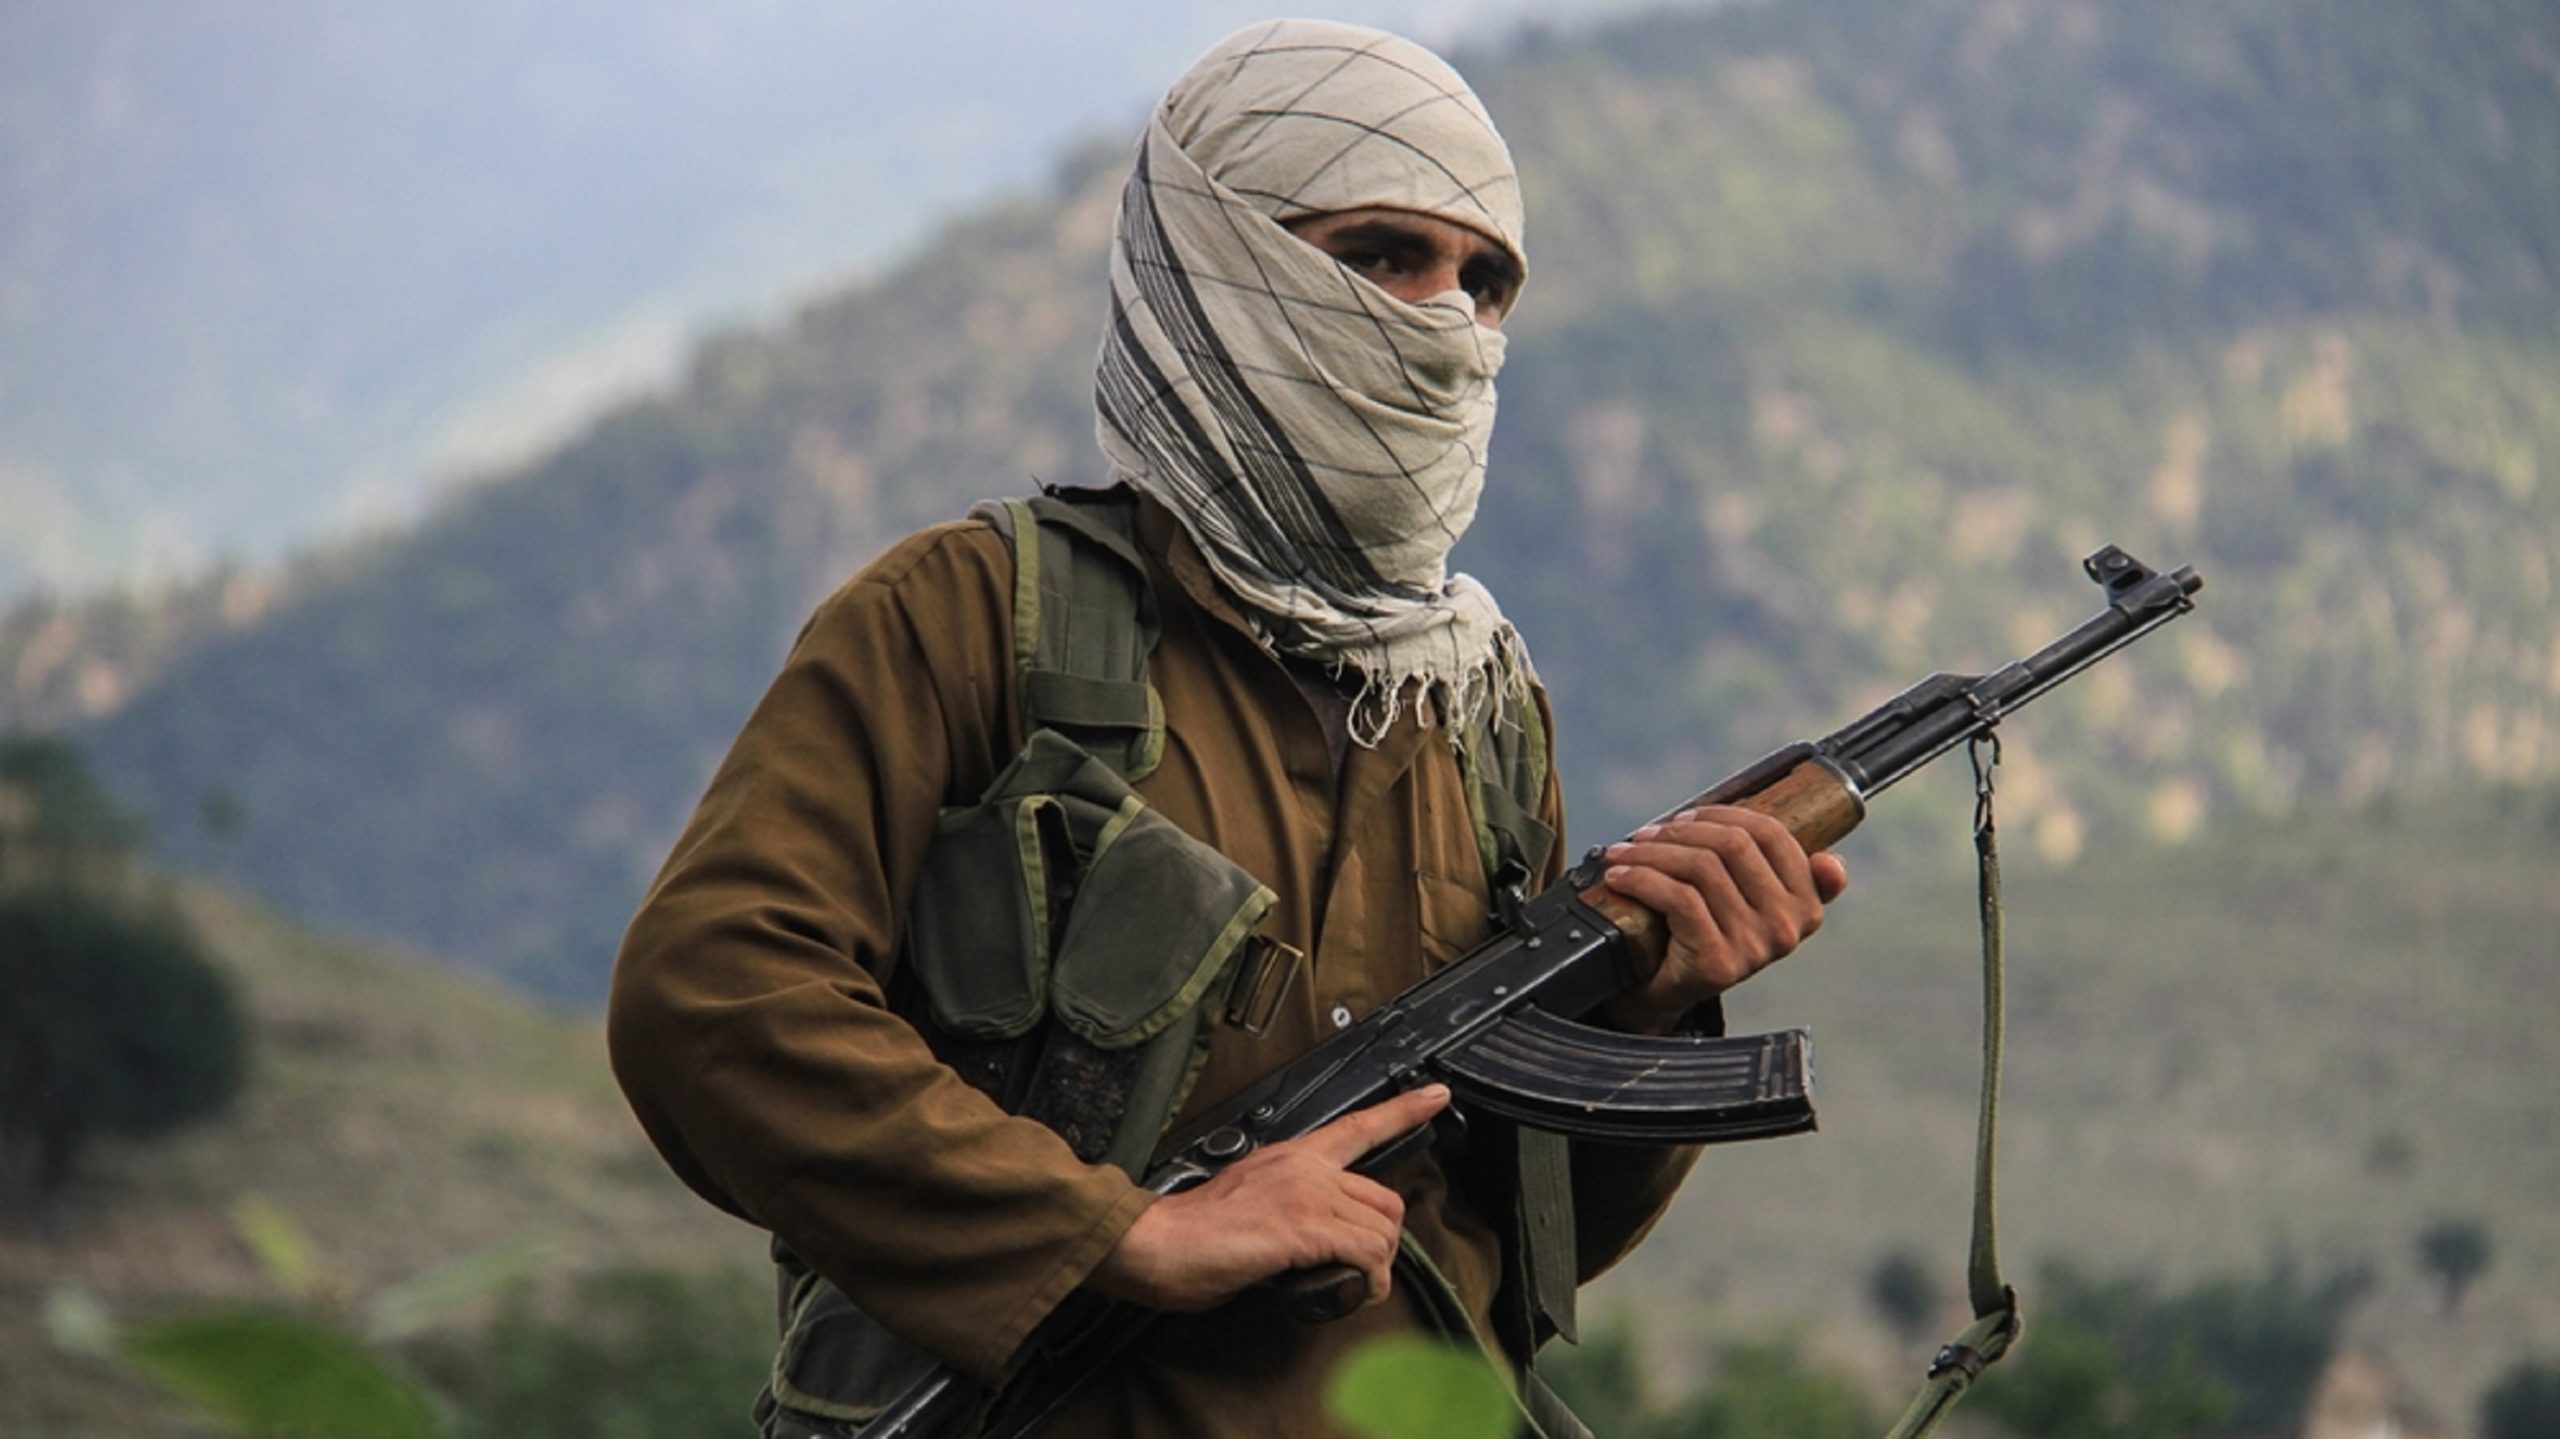 But a U.N. report in July estimated that the Qaeda affiliate had between 180 to 400 fighters — “primarily from Bangladesh, India, Myanmar and Pakistan” — who were in several Taliban combat units.“We know from a range of sources that AQIS participated in the Taliban’s insurgency against the U.S. as well as operations against ISIS-K,” Mr. Mir said, referring to the Islamic State’s branch in Afghanistan, a bitter rival of Al Qaeda.